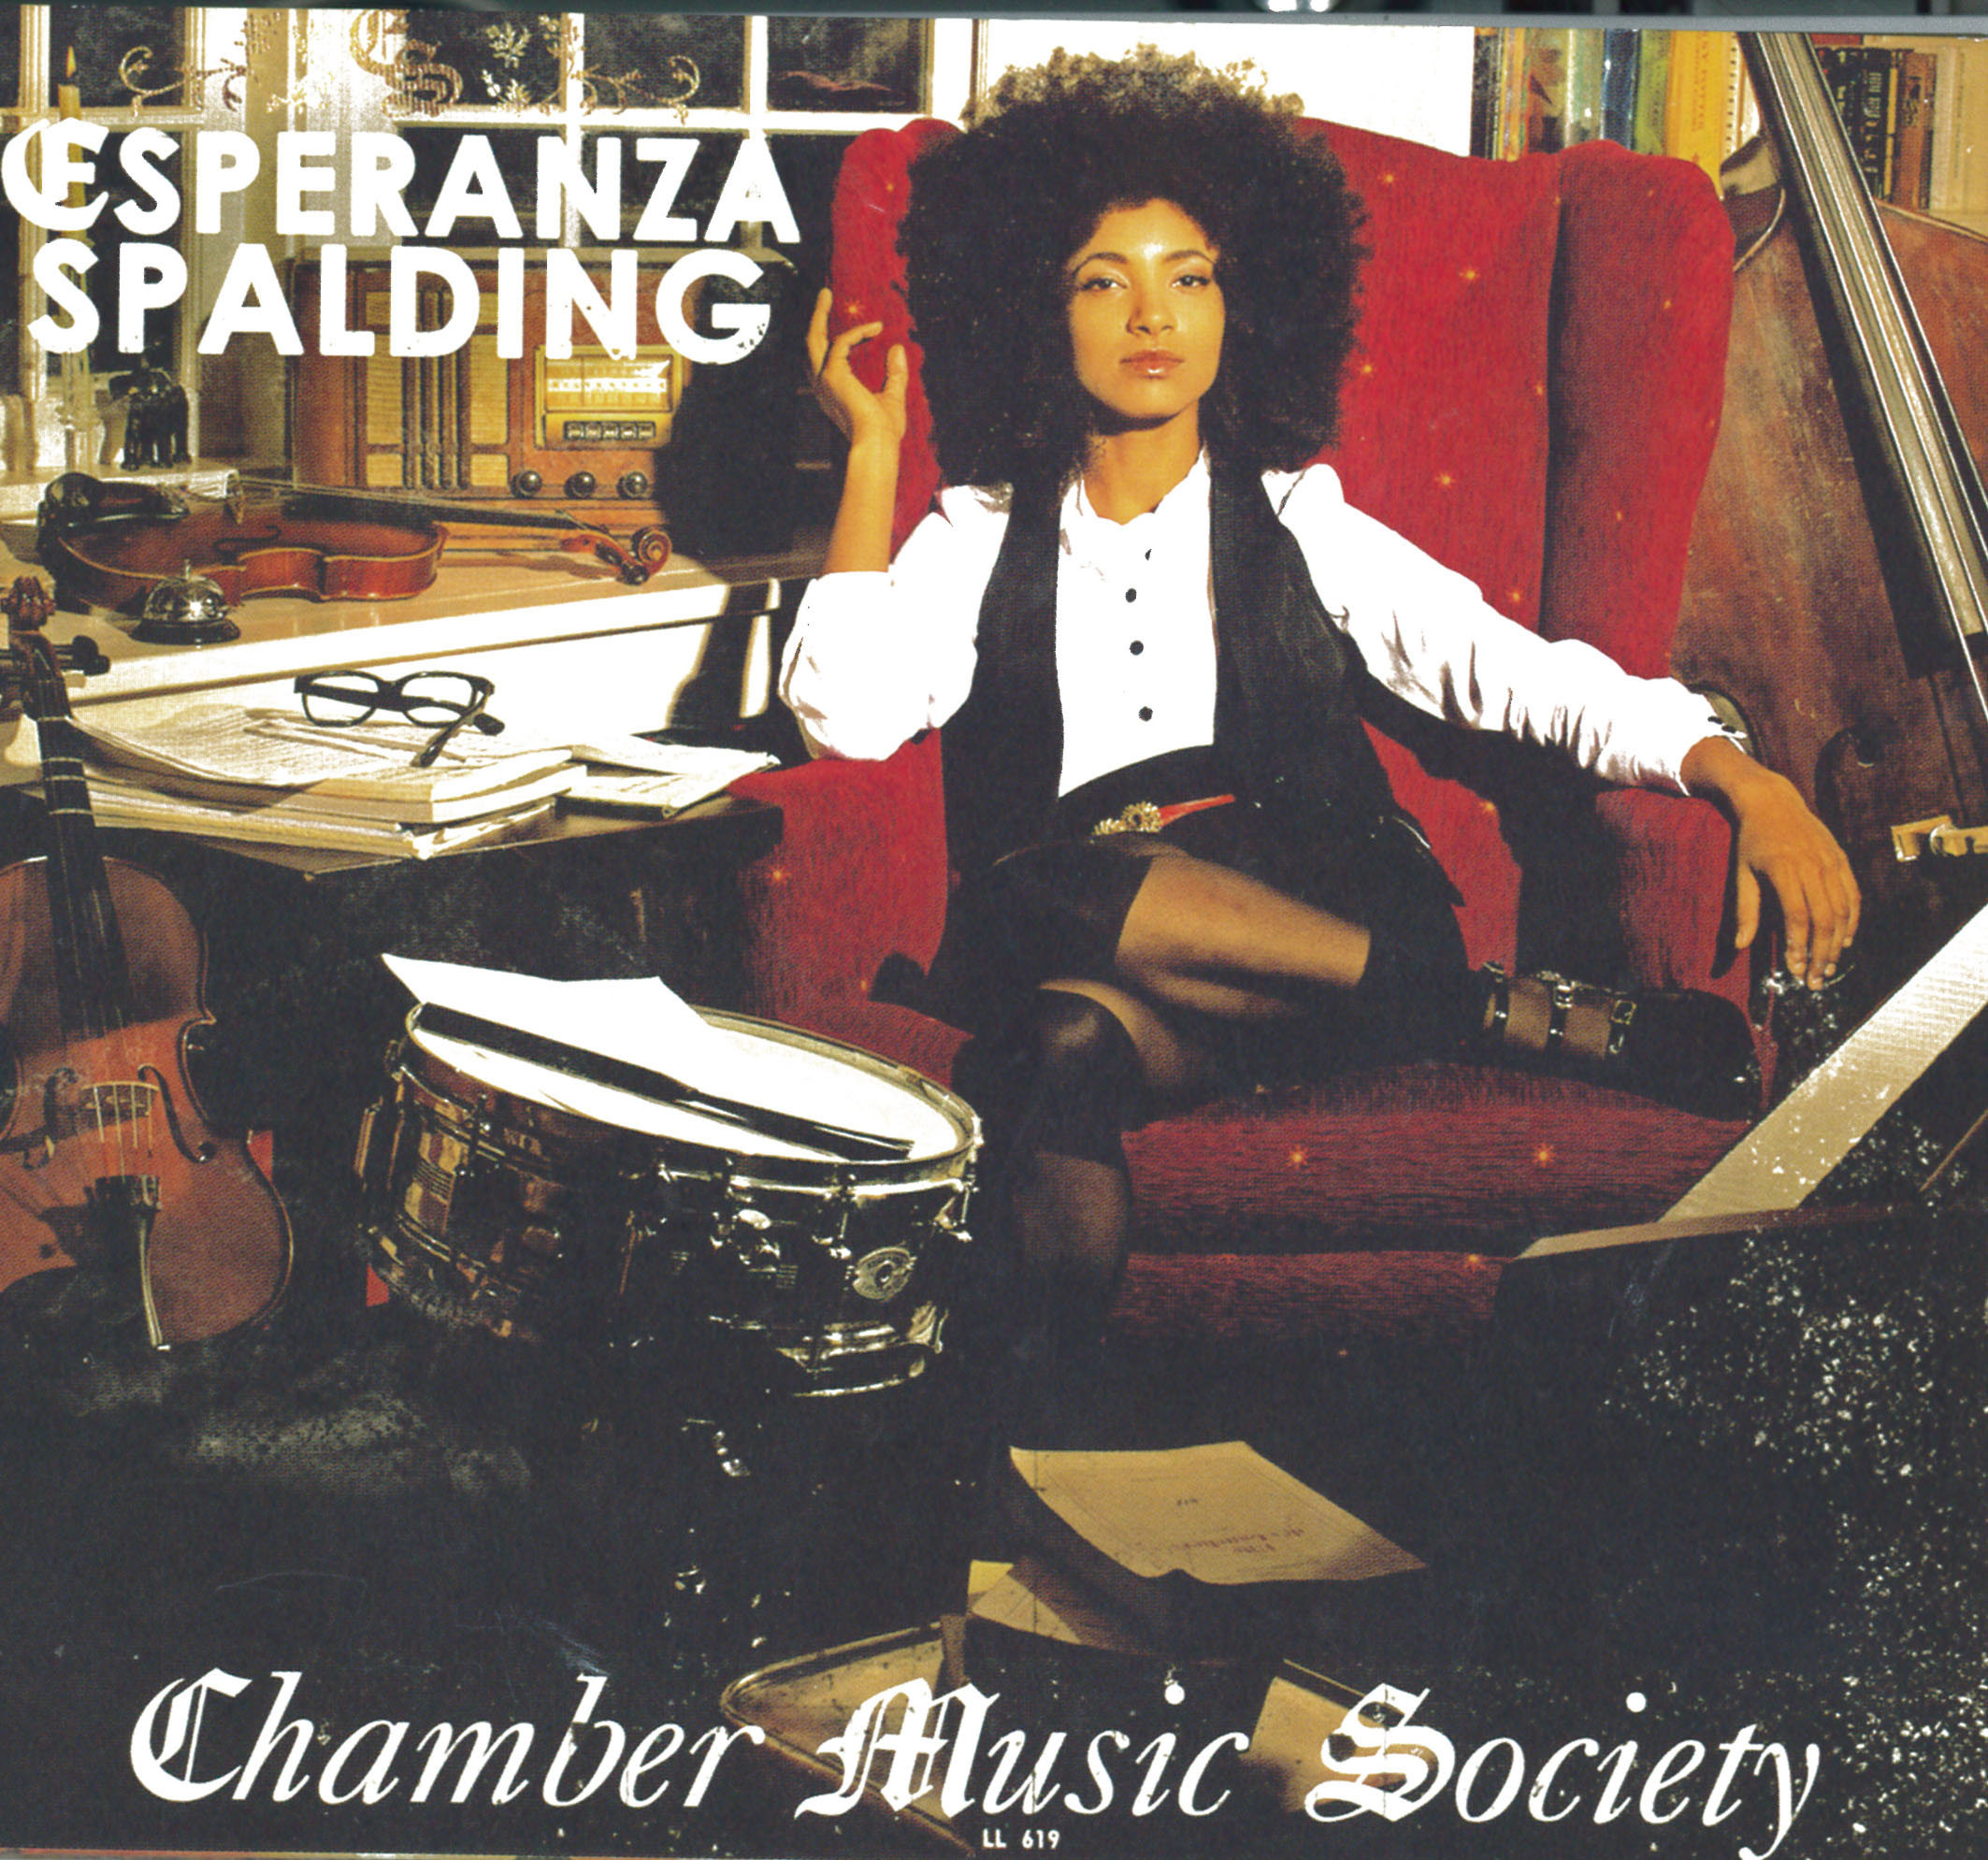 Music society. Esperanza Spalding Chamber Music Society. Esperanza Spalding album Esperanza. Esperanza Spalding / SONGWRIGHTS Apothecary Lab. Фото SONGWRIGHTS Apothecary Lab – Esperanza Spalding.